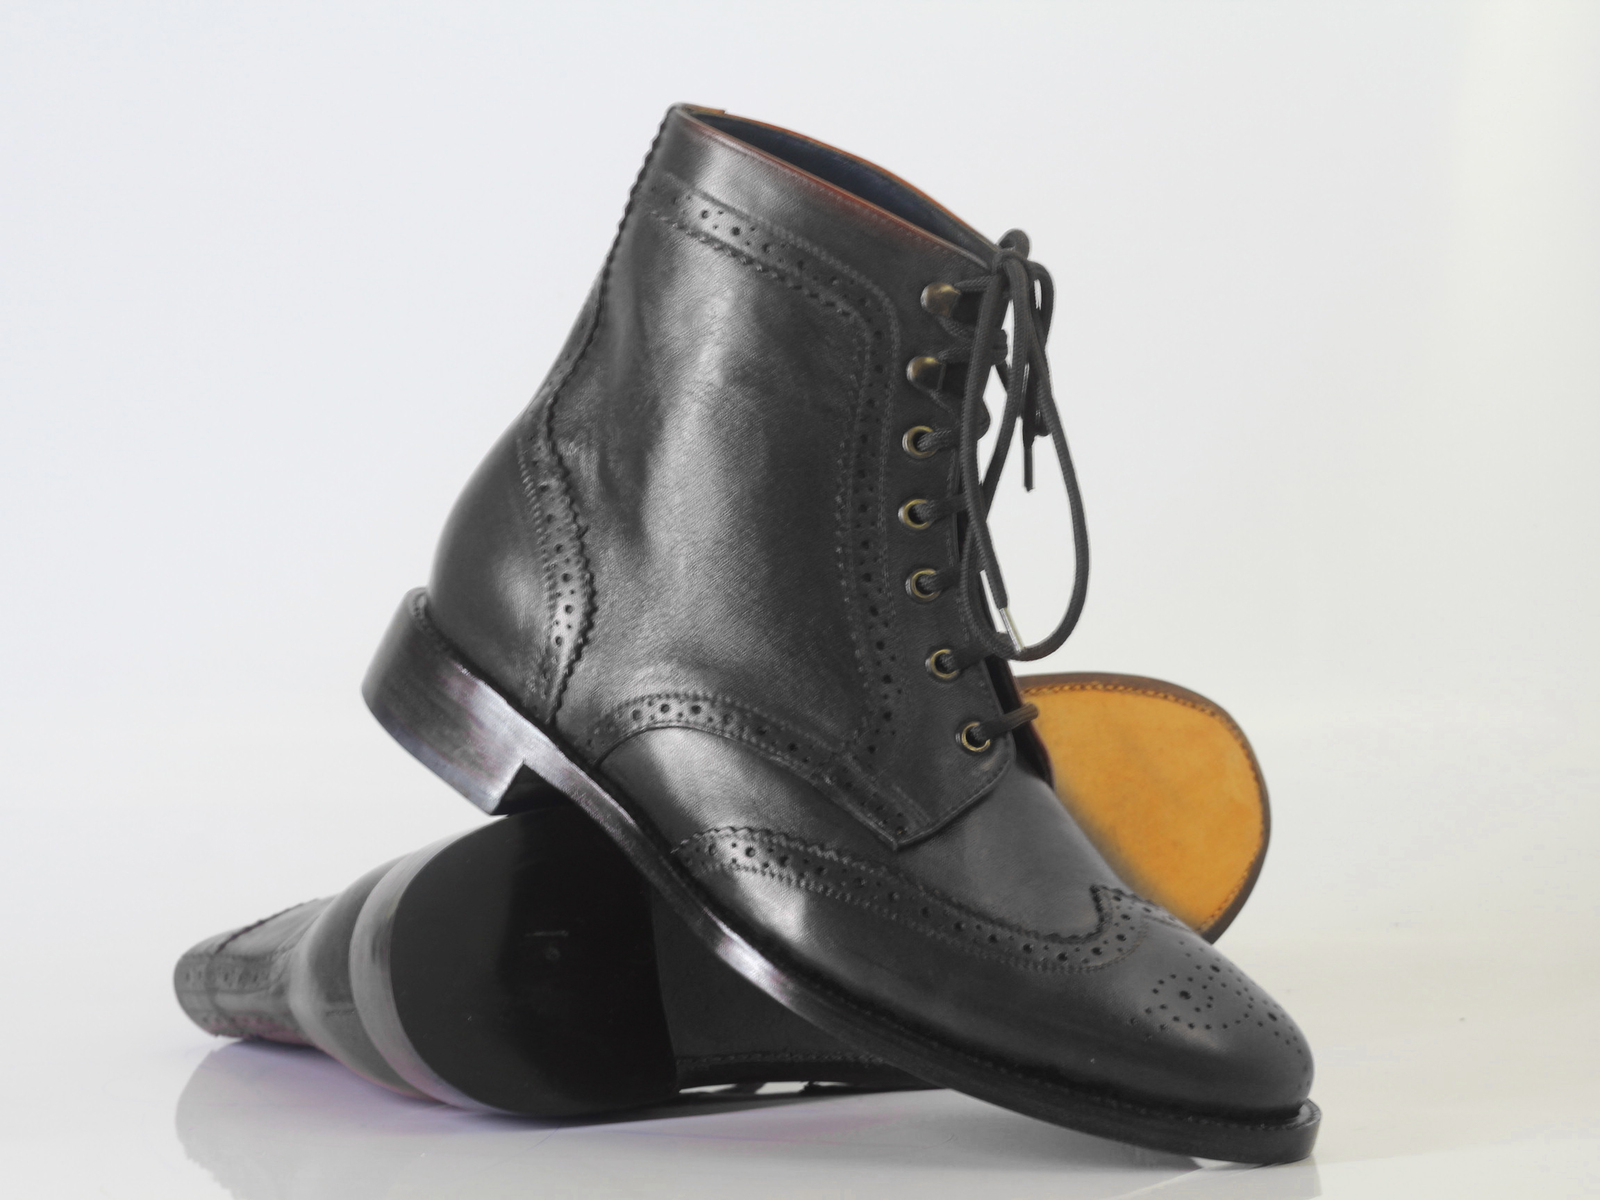 Handmade Men's Ankle High Black Leather Boots, Men Wing Tip Brogue Fashion Boots